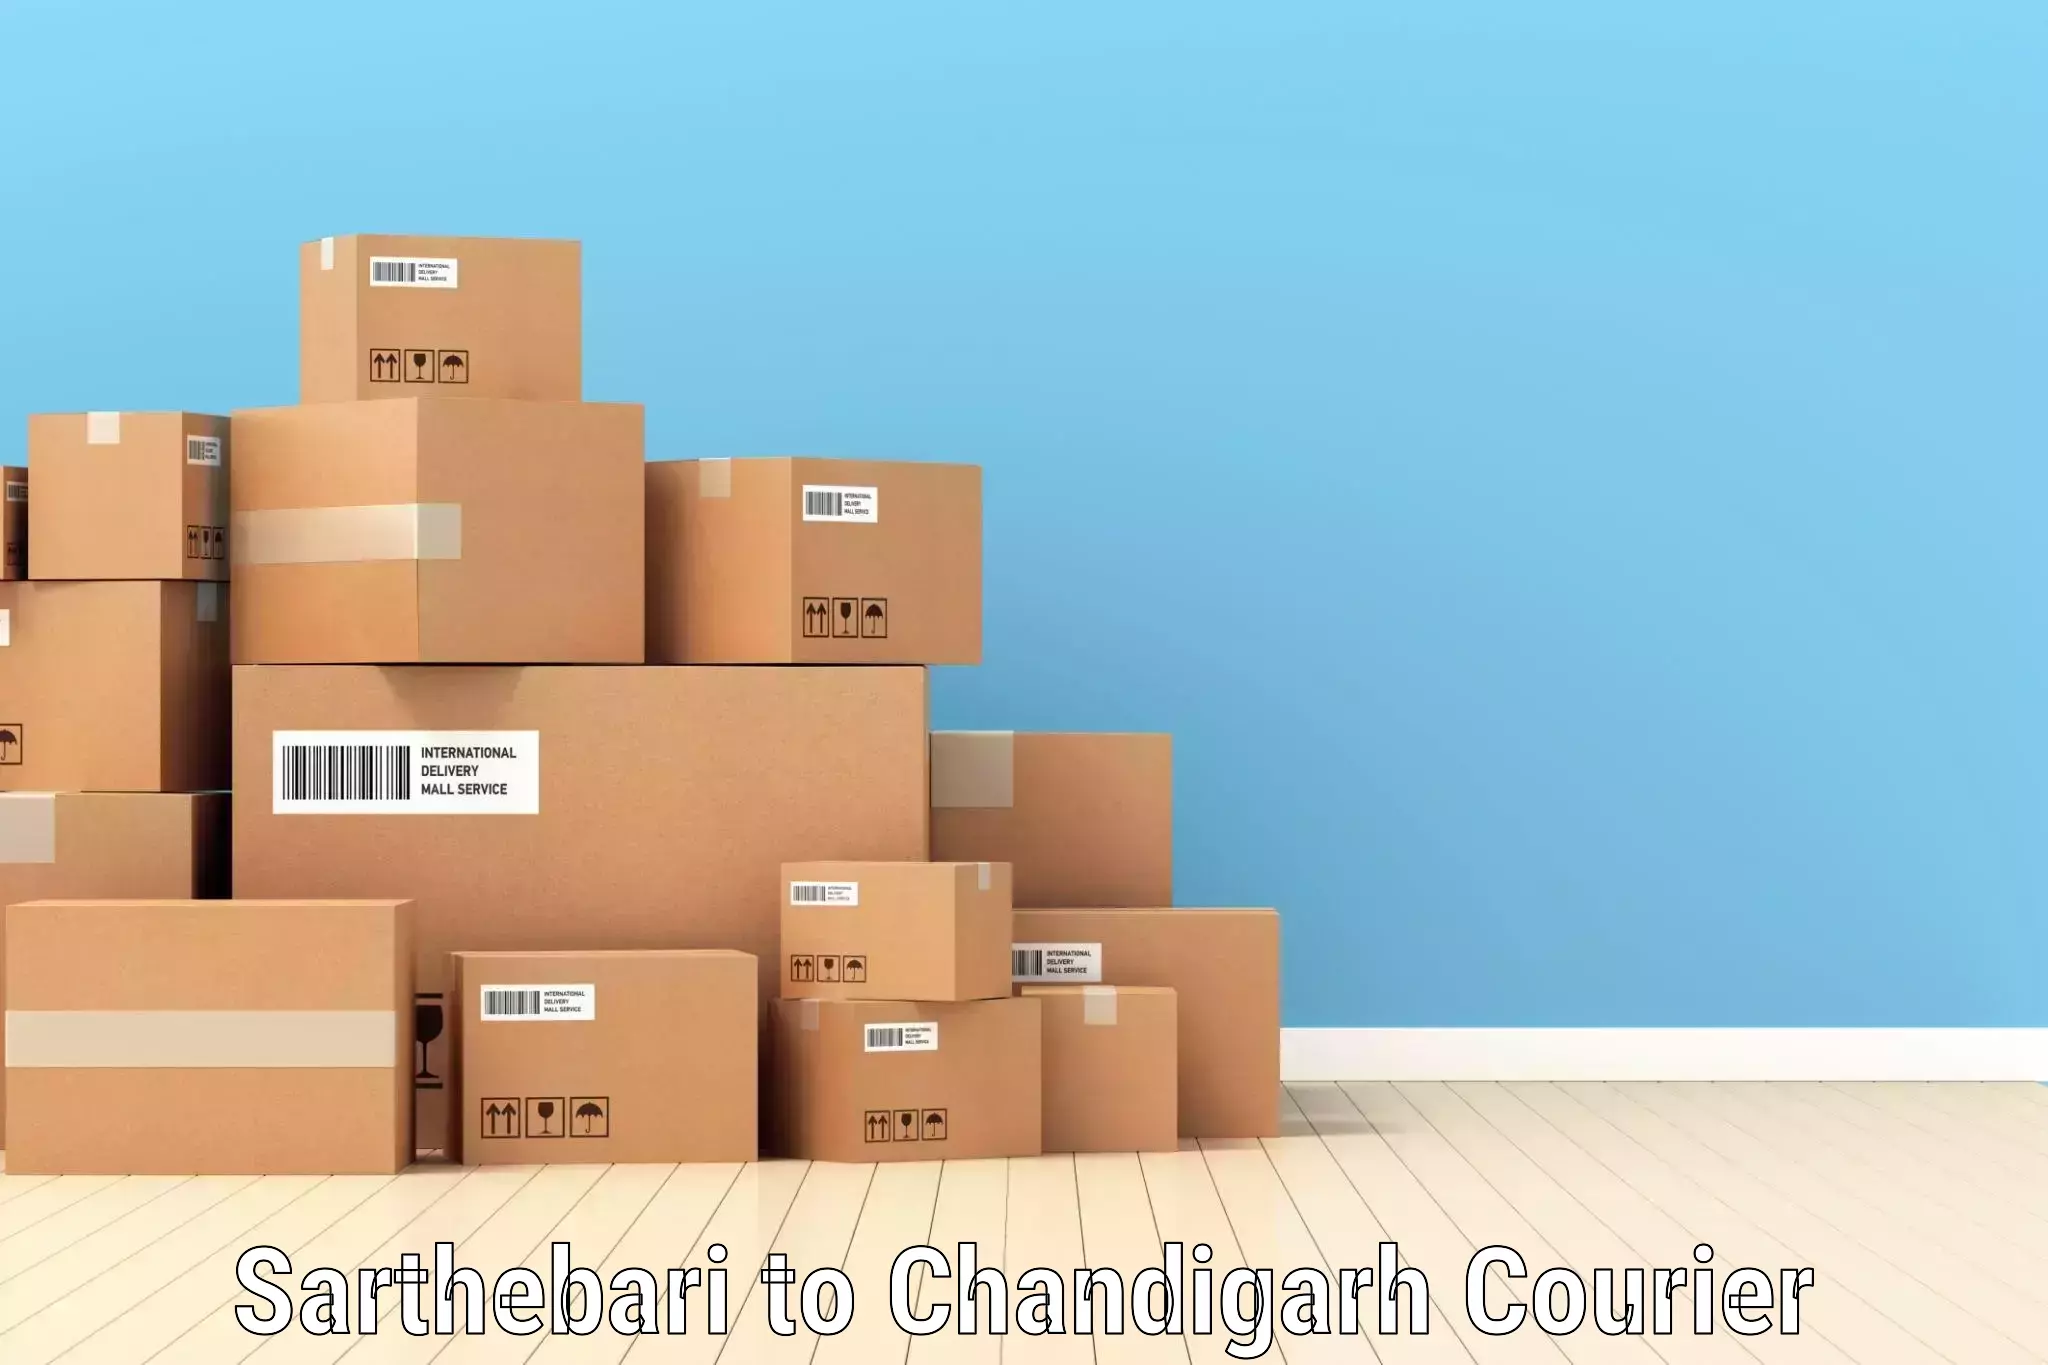 On-call courier service in Sarthebari to Chandigarh